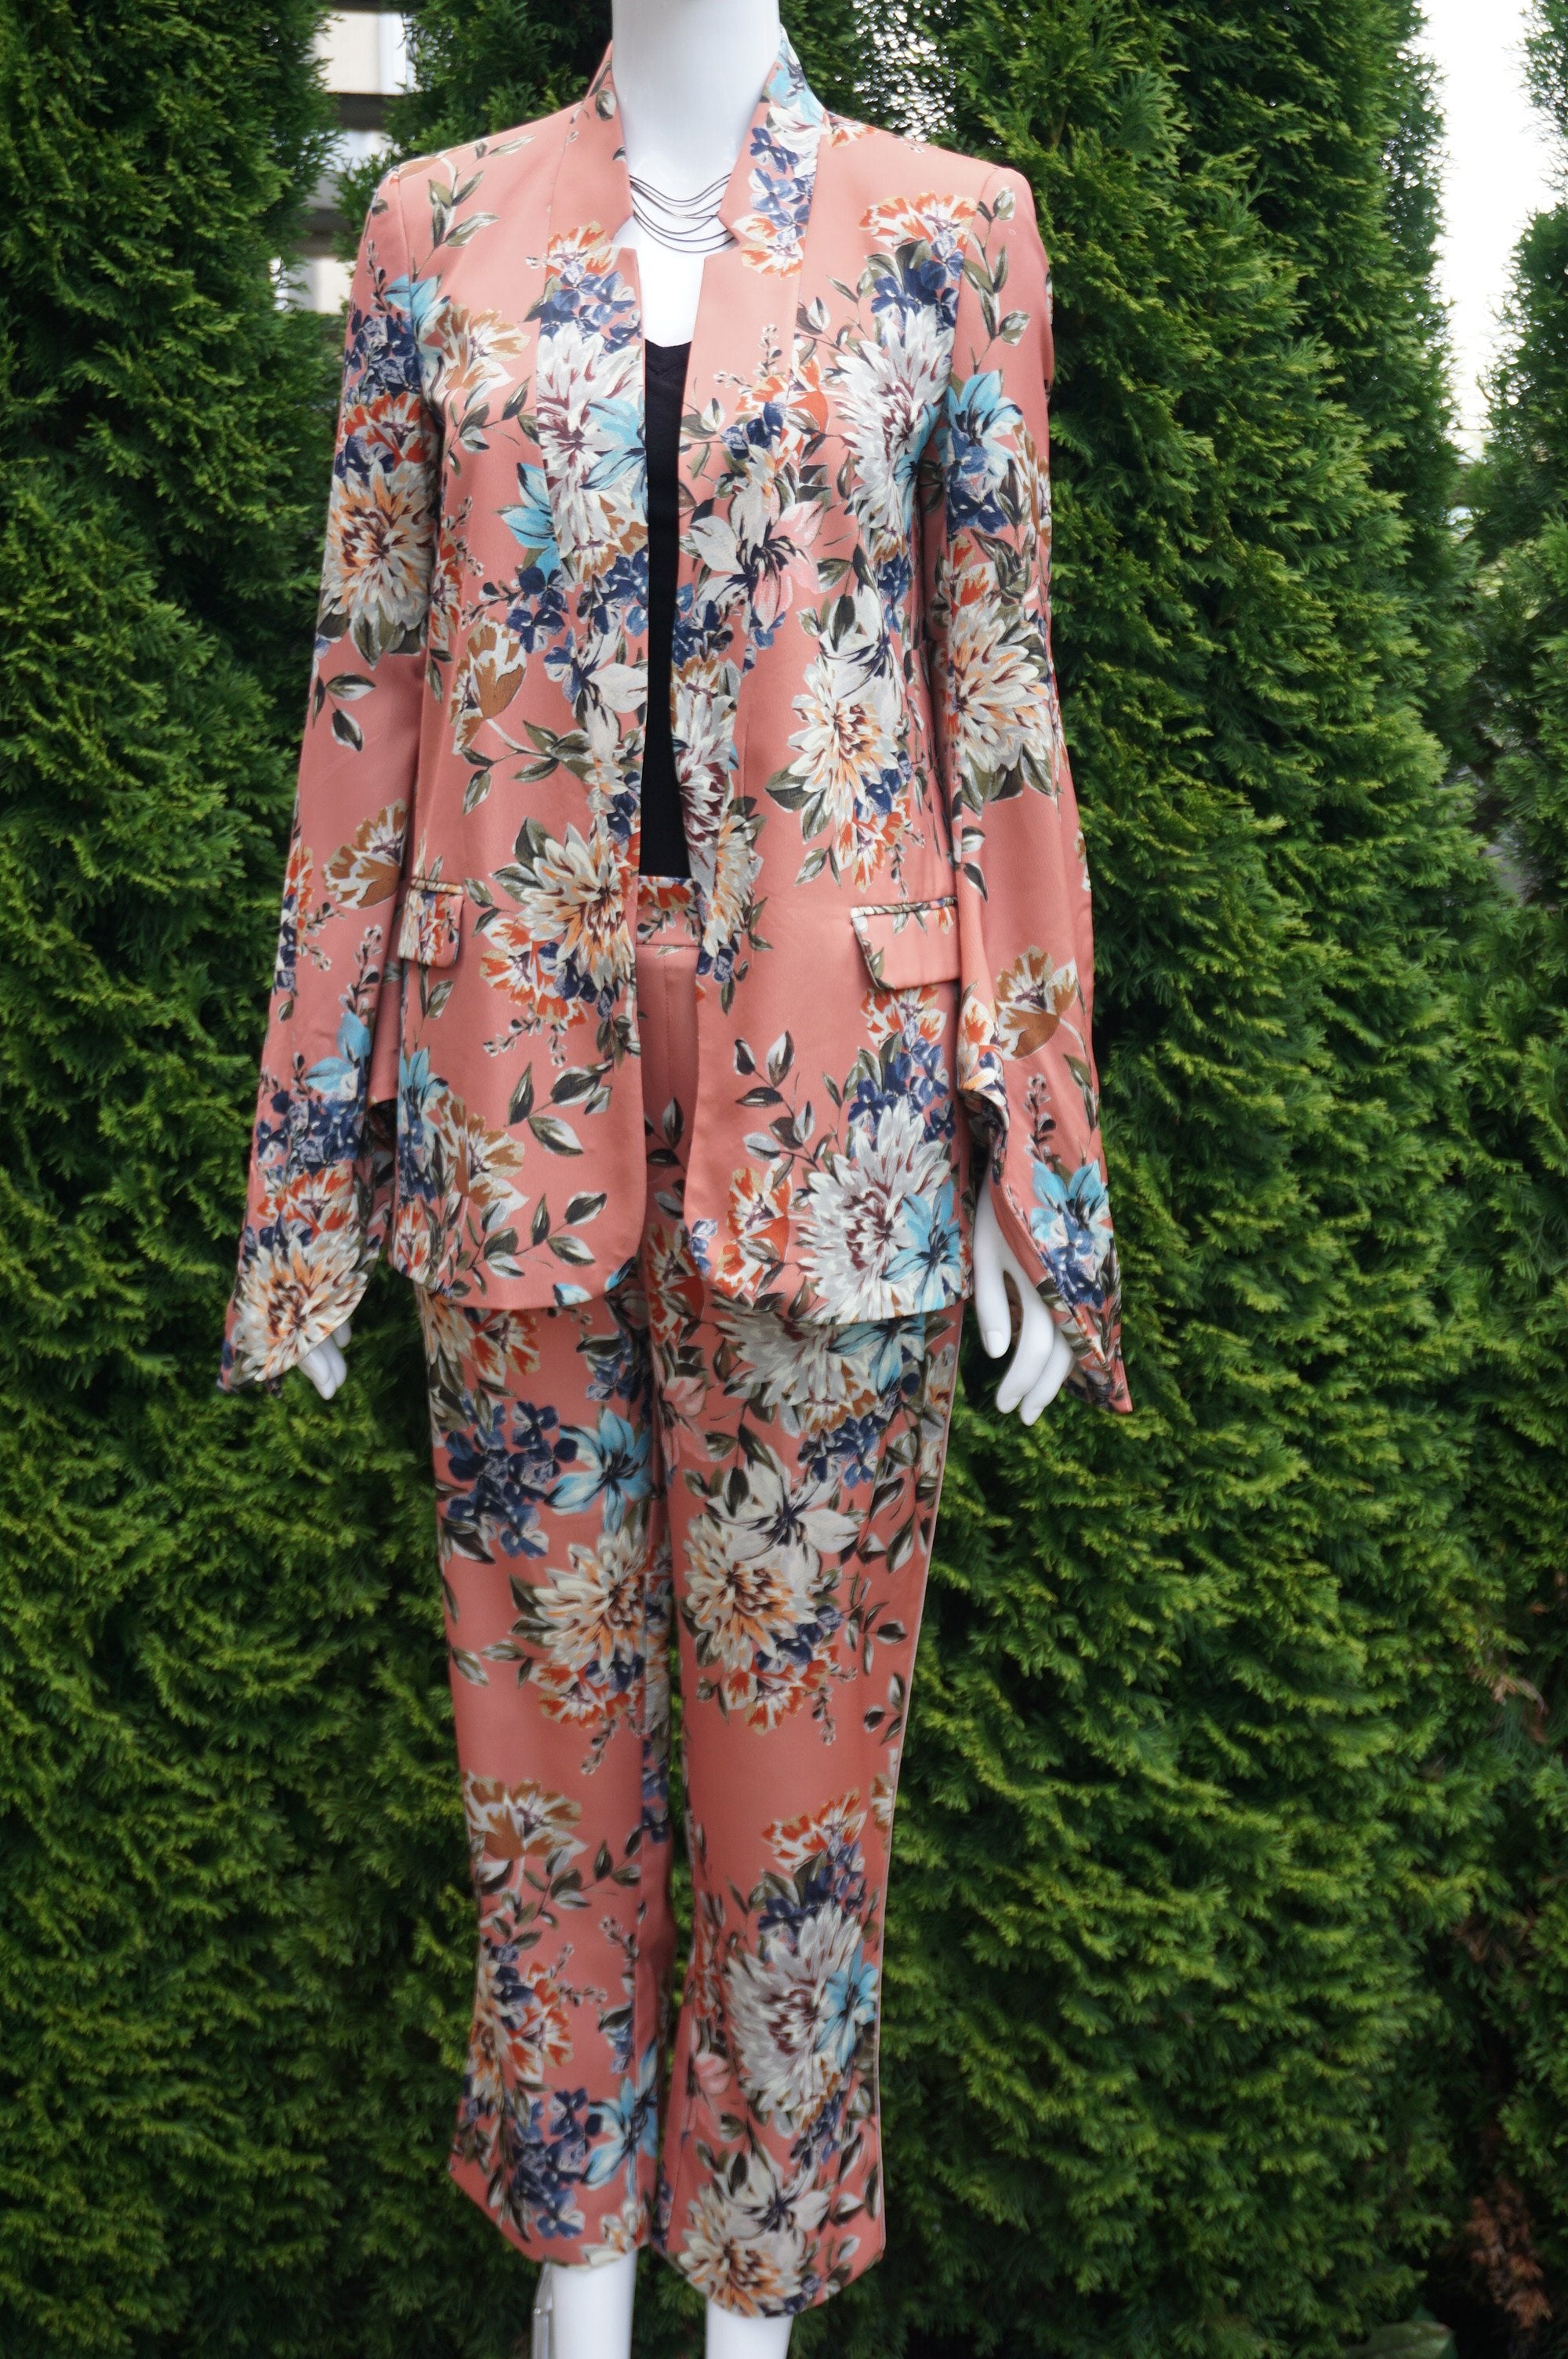 Zara Floral Pant Suit, This unique floral pantsuit helps you take on the world while looking feminine and elegant doing it. Pants length 36 inches, Waist 29 inches, elastic in the back. Suit jacket length 27 inches. Suit shoulder 15 inches. , Pink, women's Jackets & Coats, Pants, women's Pink Jackets & Coats, Pants, Zara women's Jackets & Coats, Pants, women's pantsuit, women's pant suit, floral pink suit